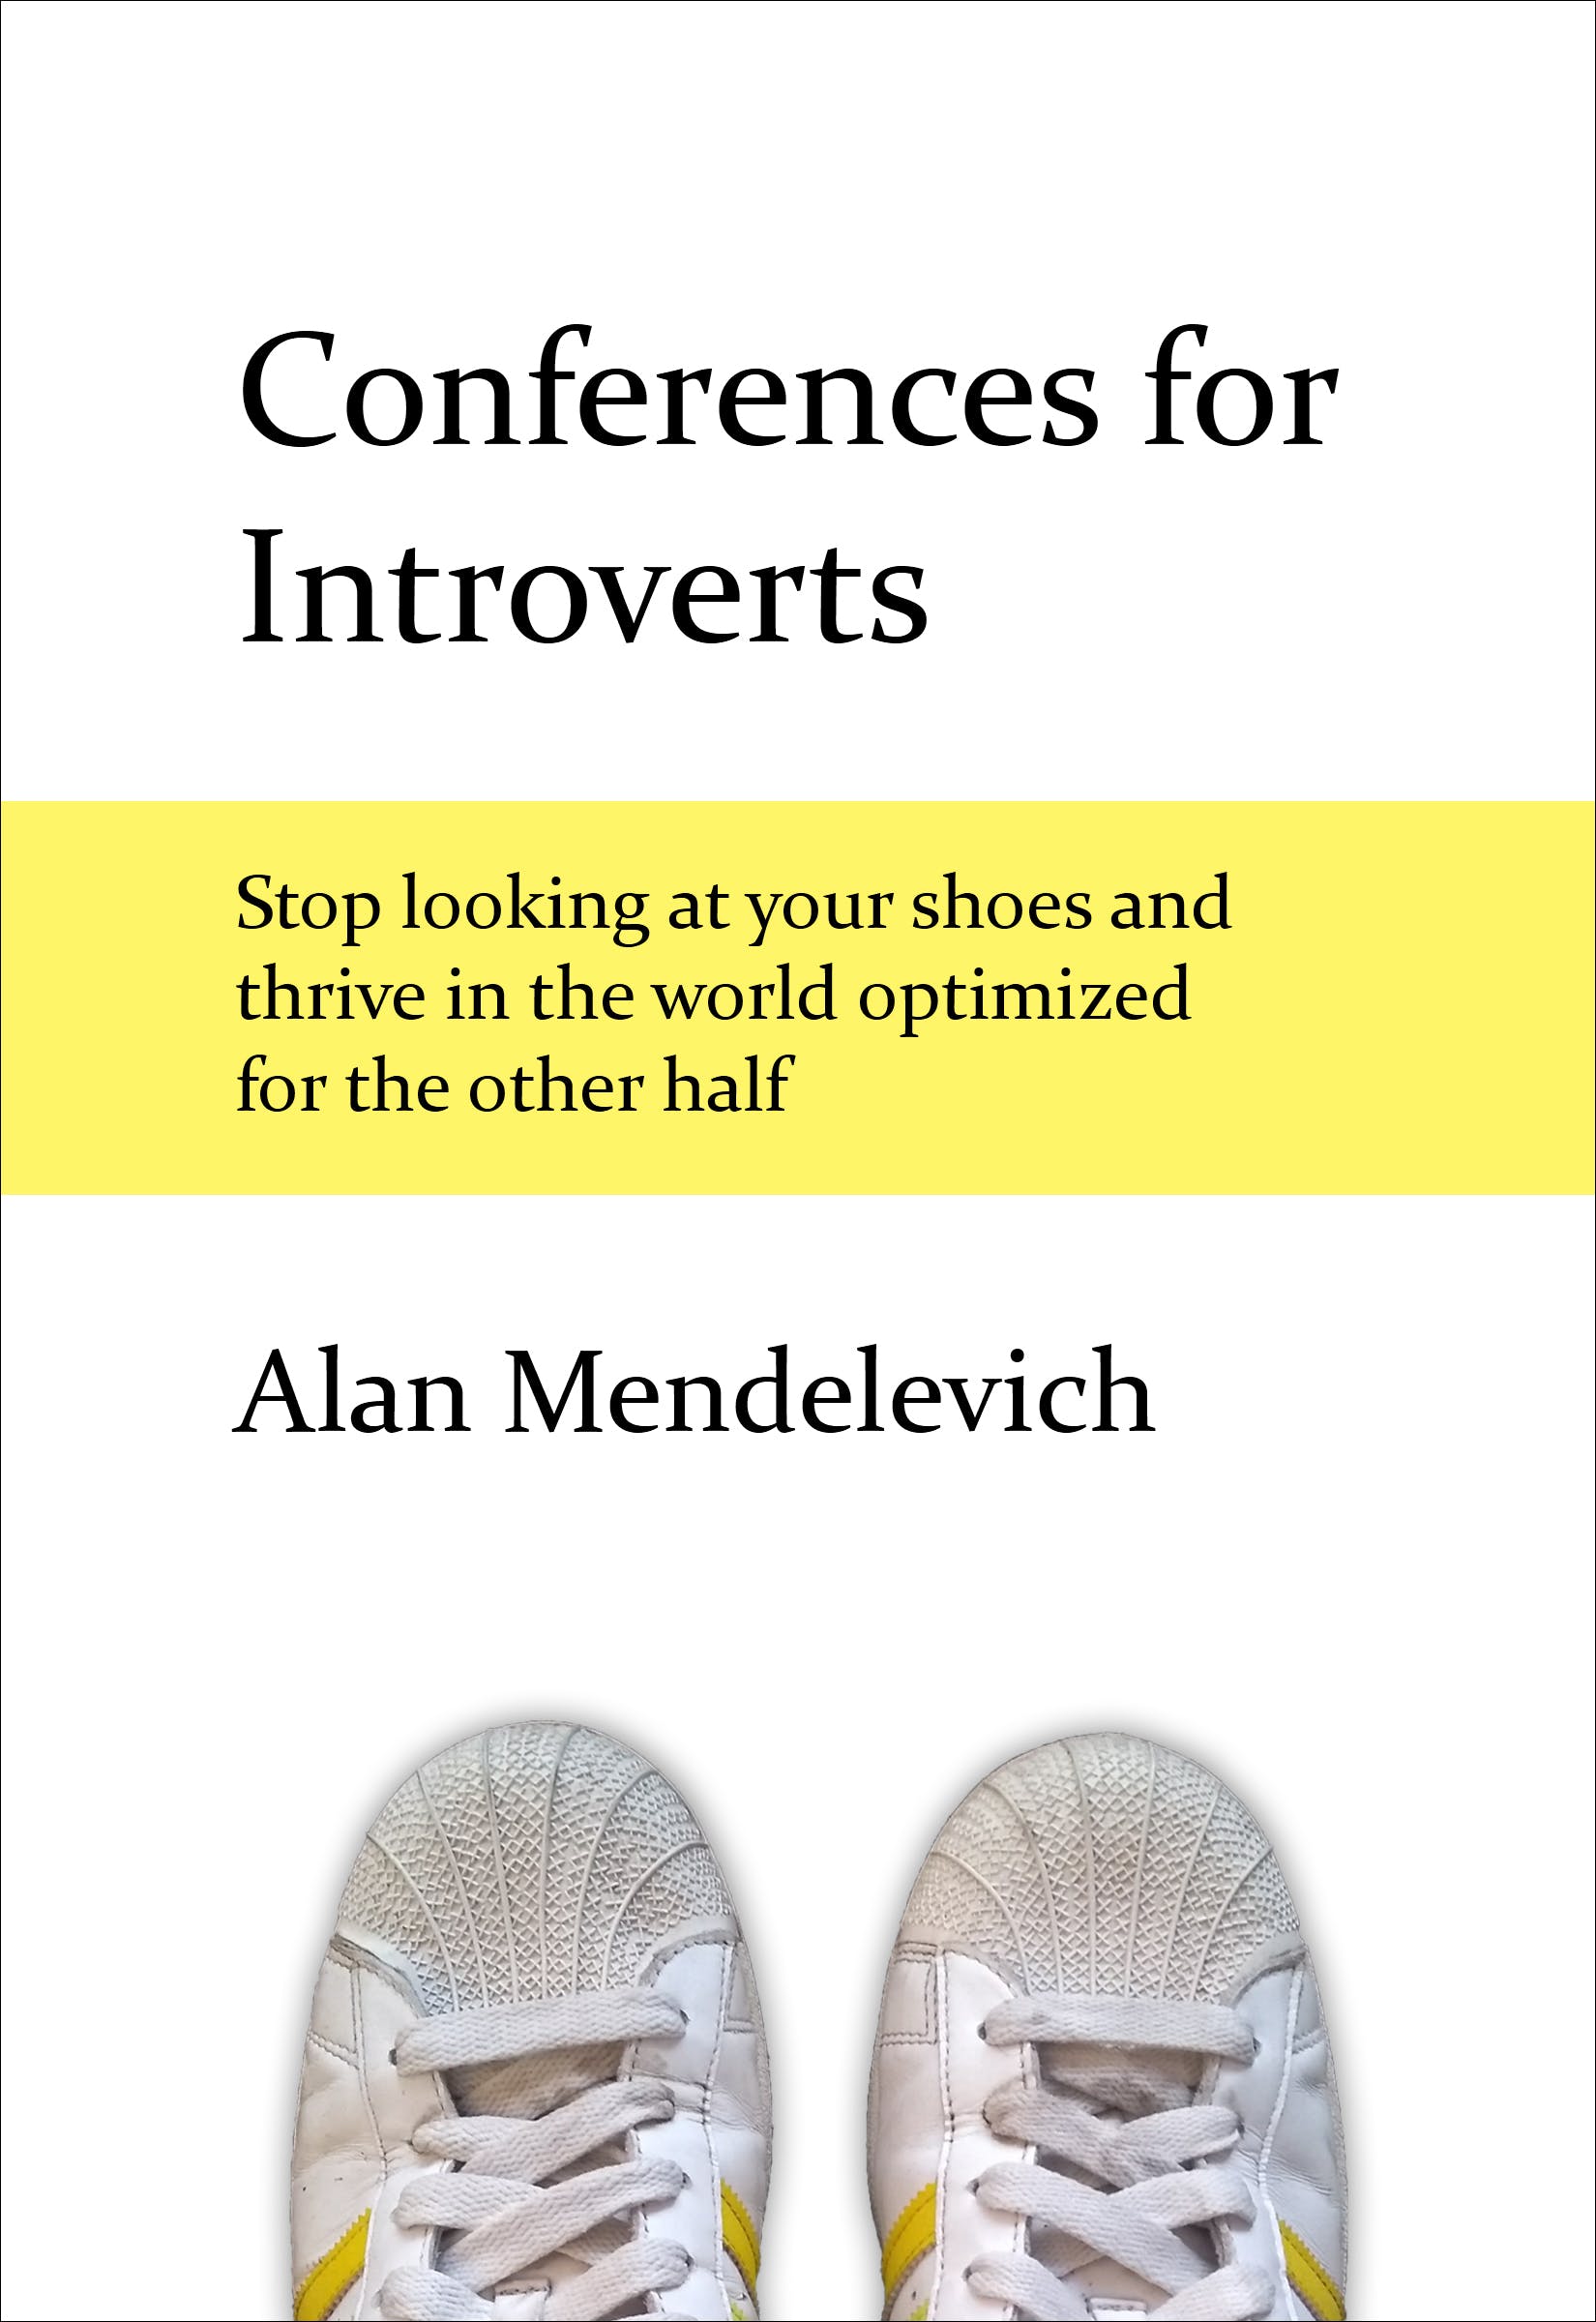 Conferences for Introverts media 1